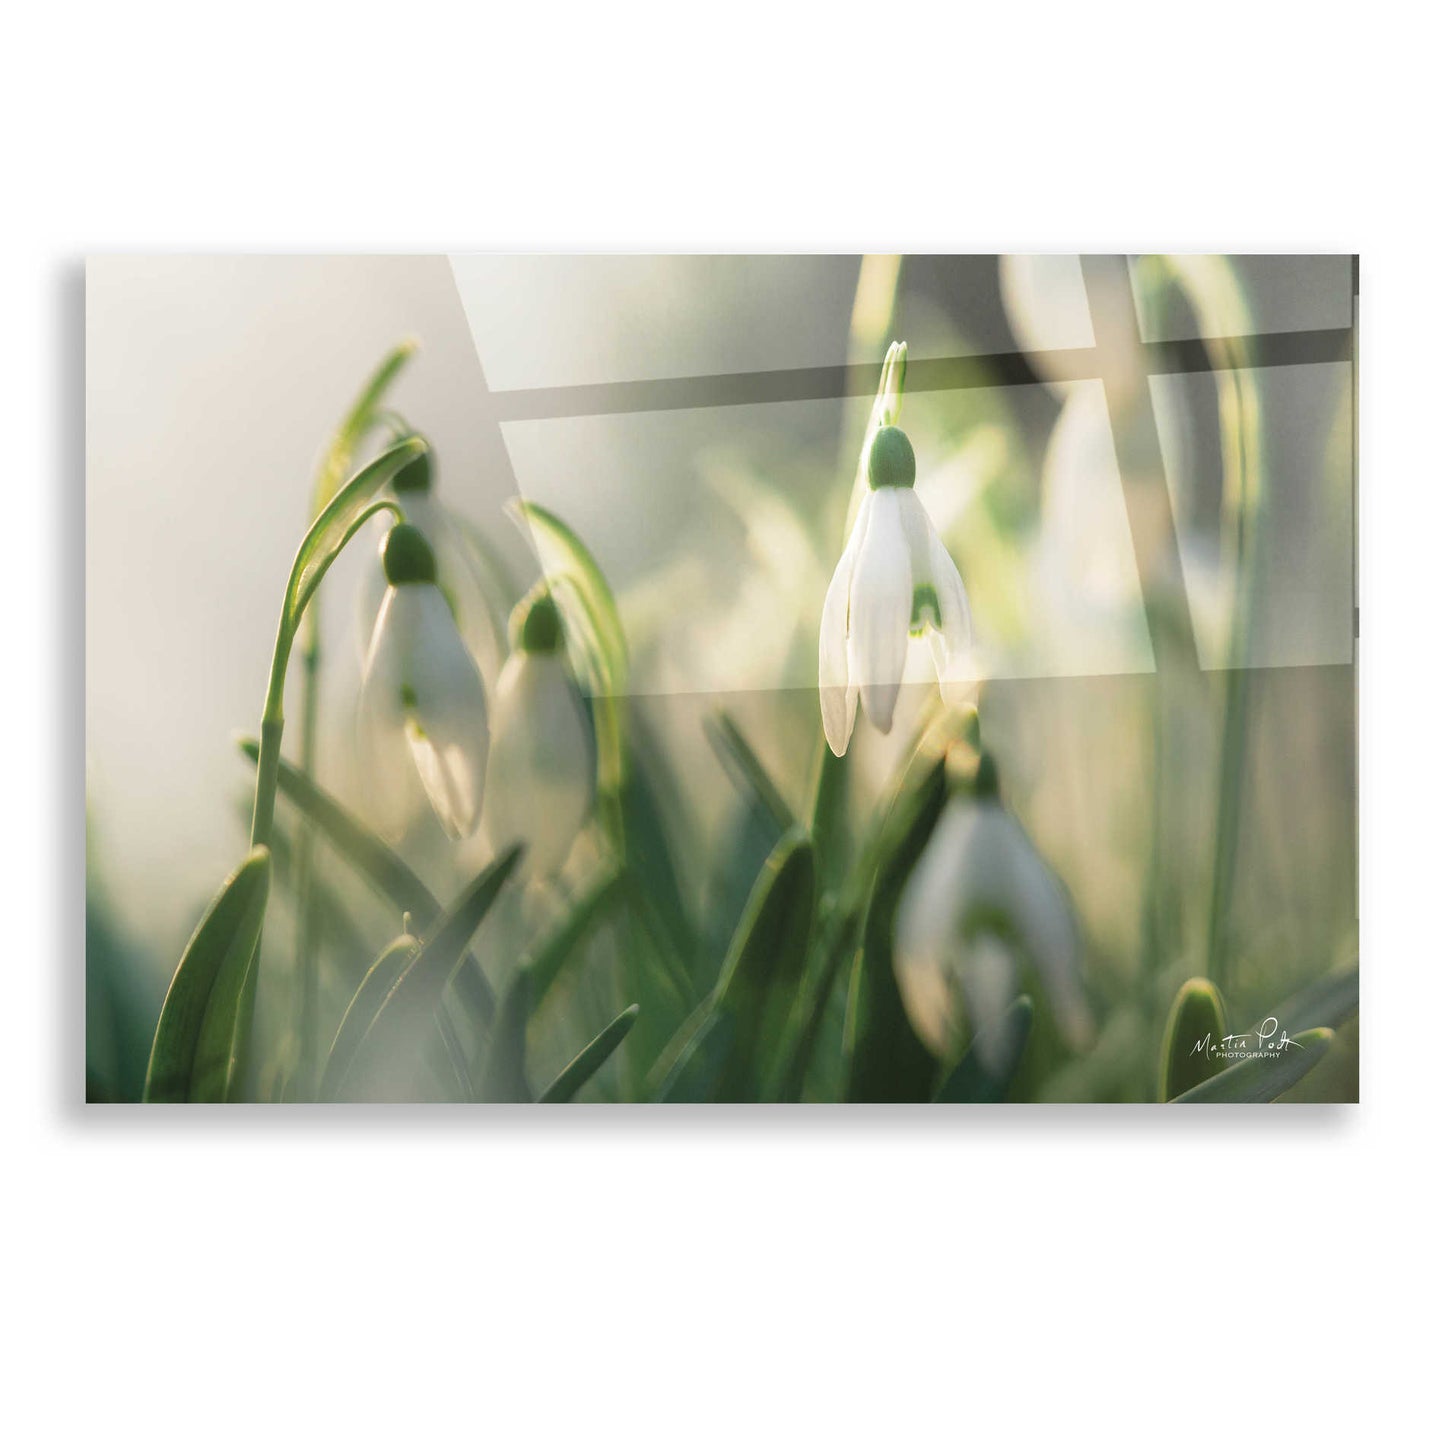 Epic Art 'Snowdrops' by Martin Podt, Acrylic Glass Wall Art,16x12